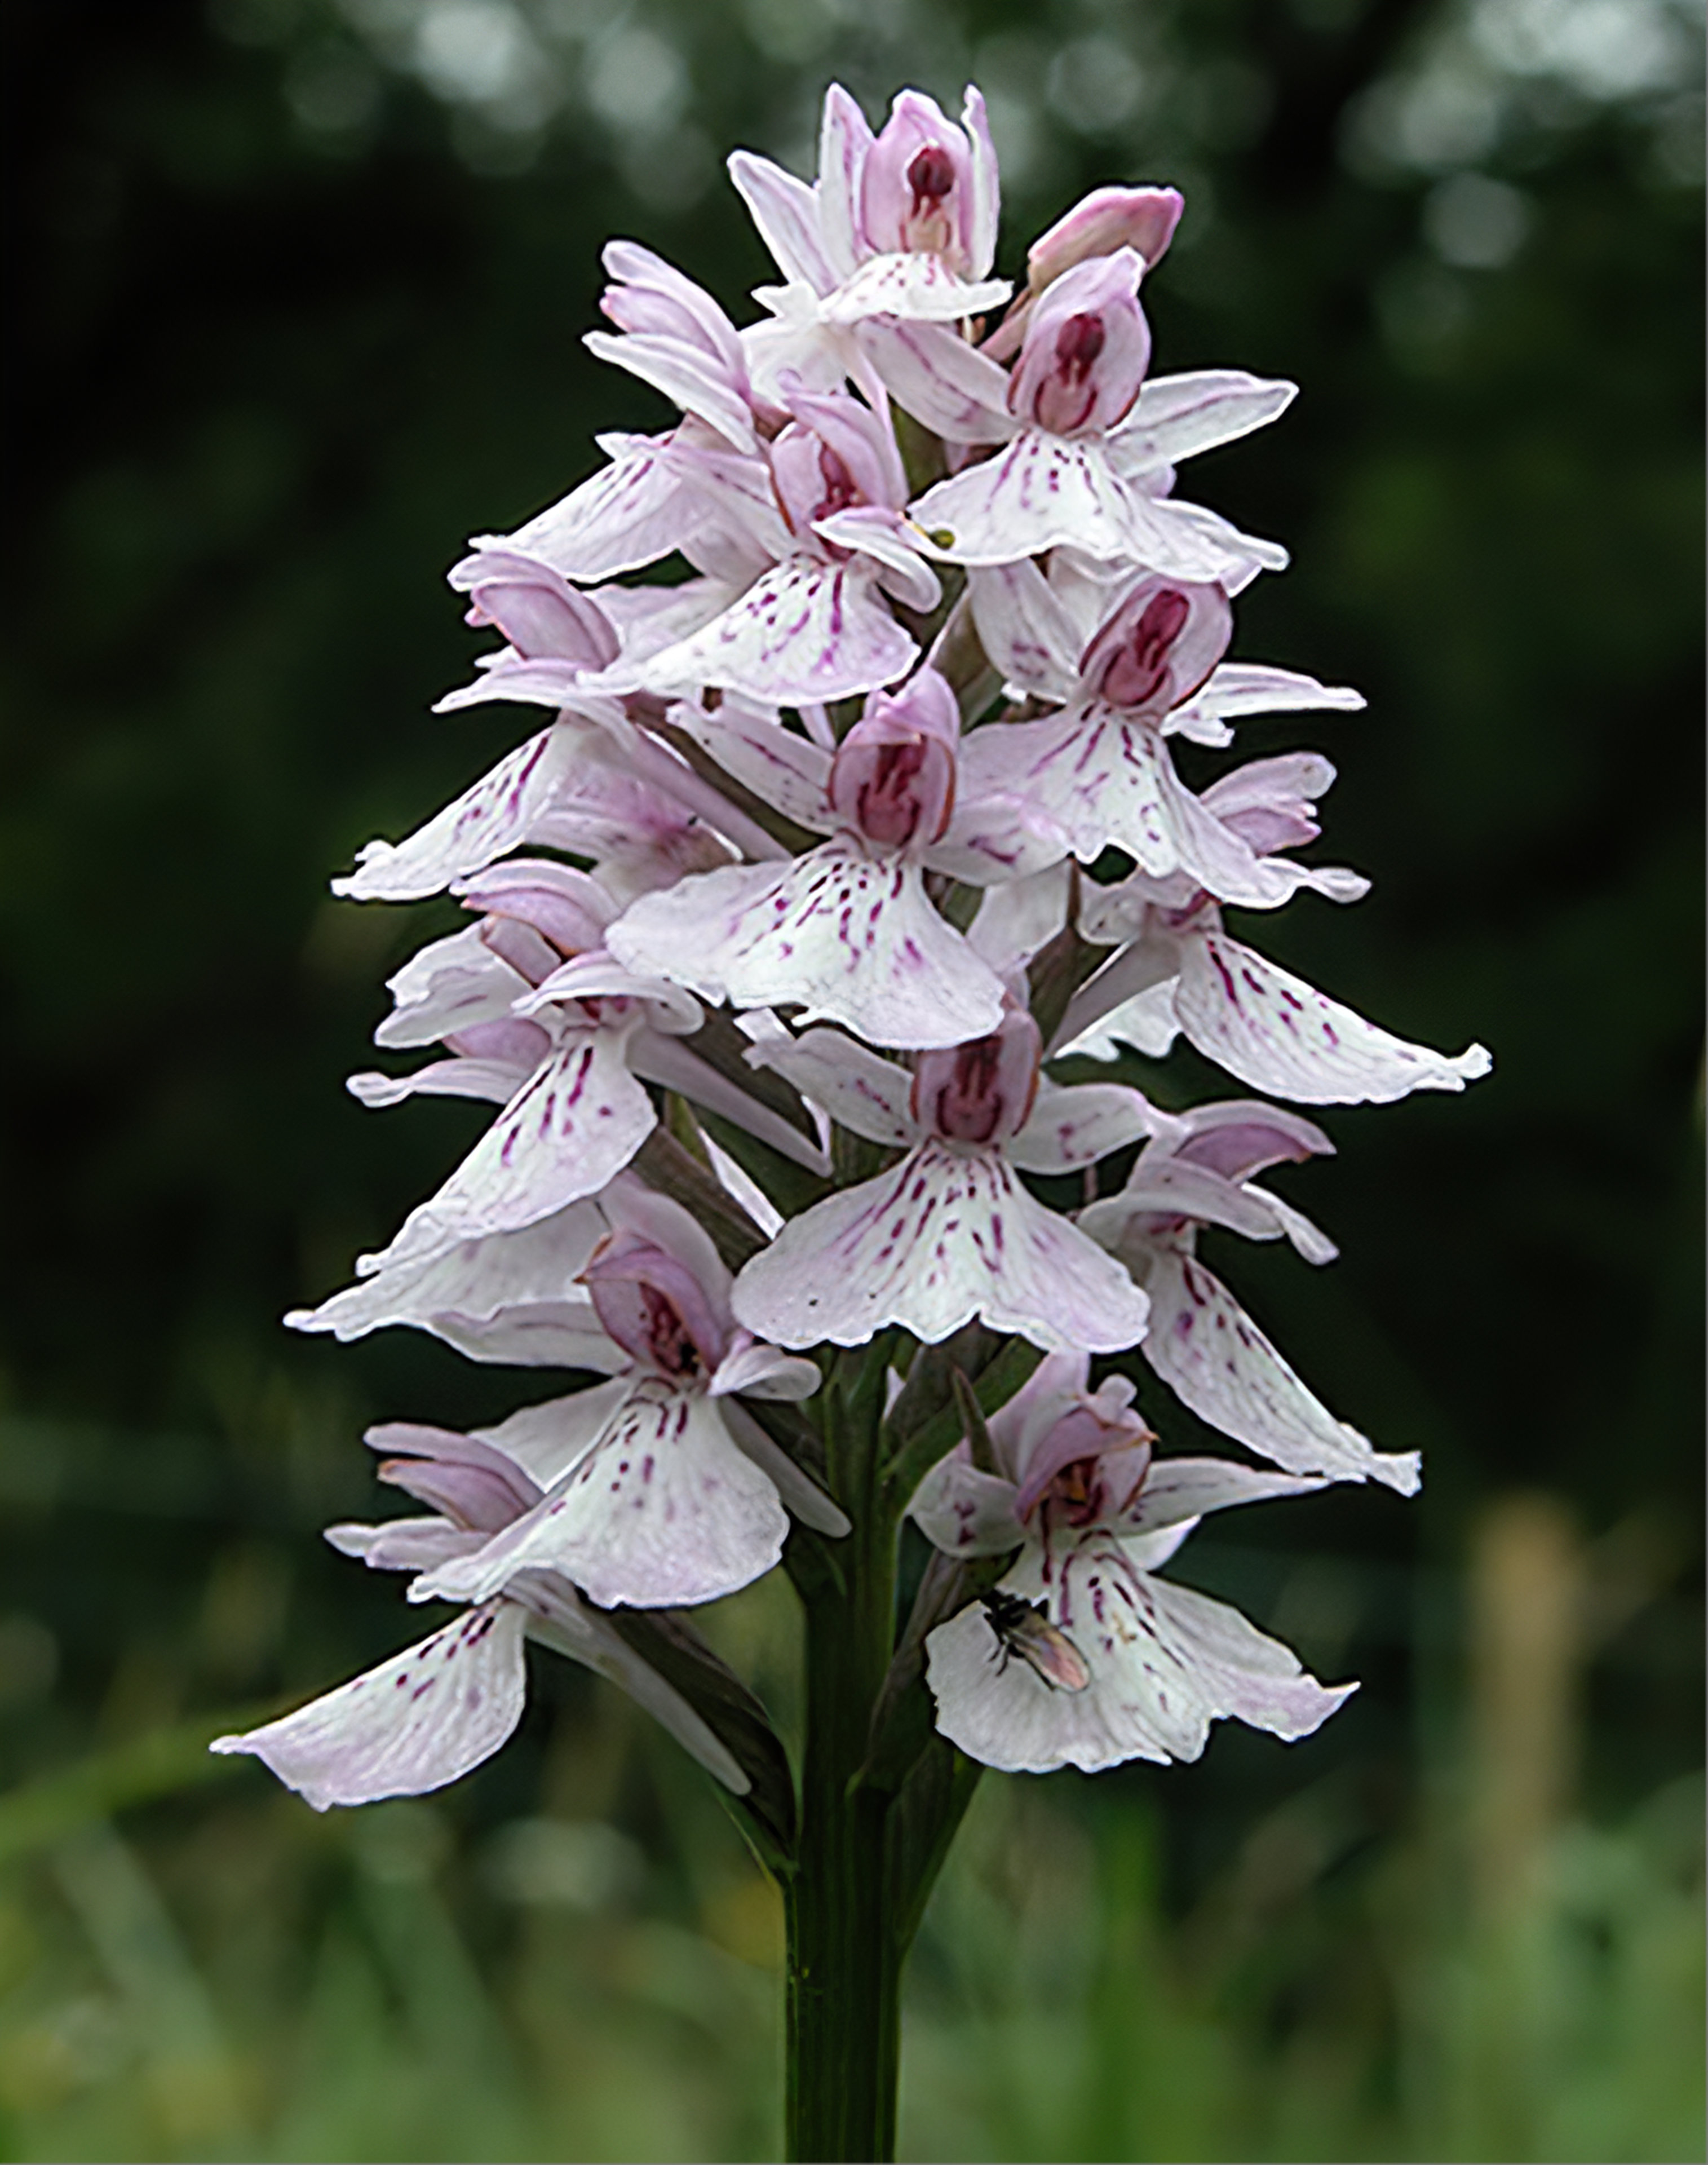 Heath-spotted orchid